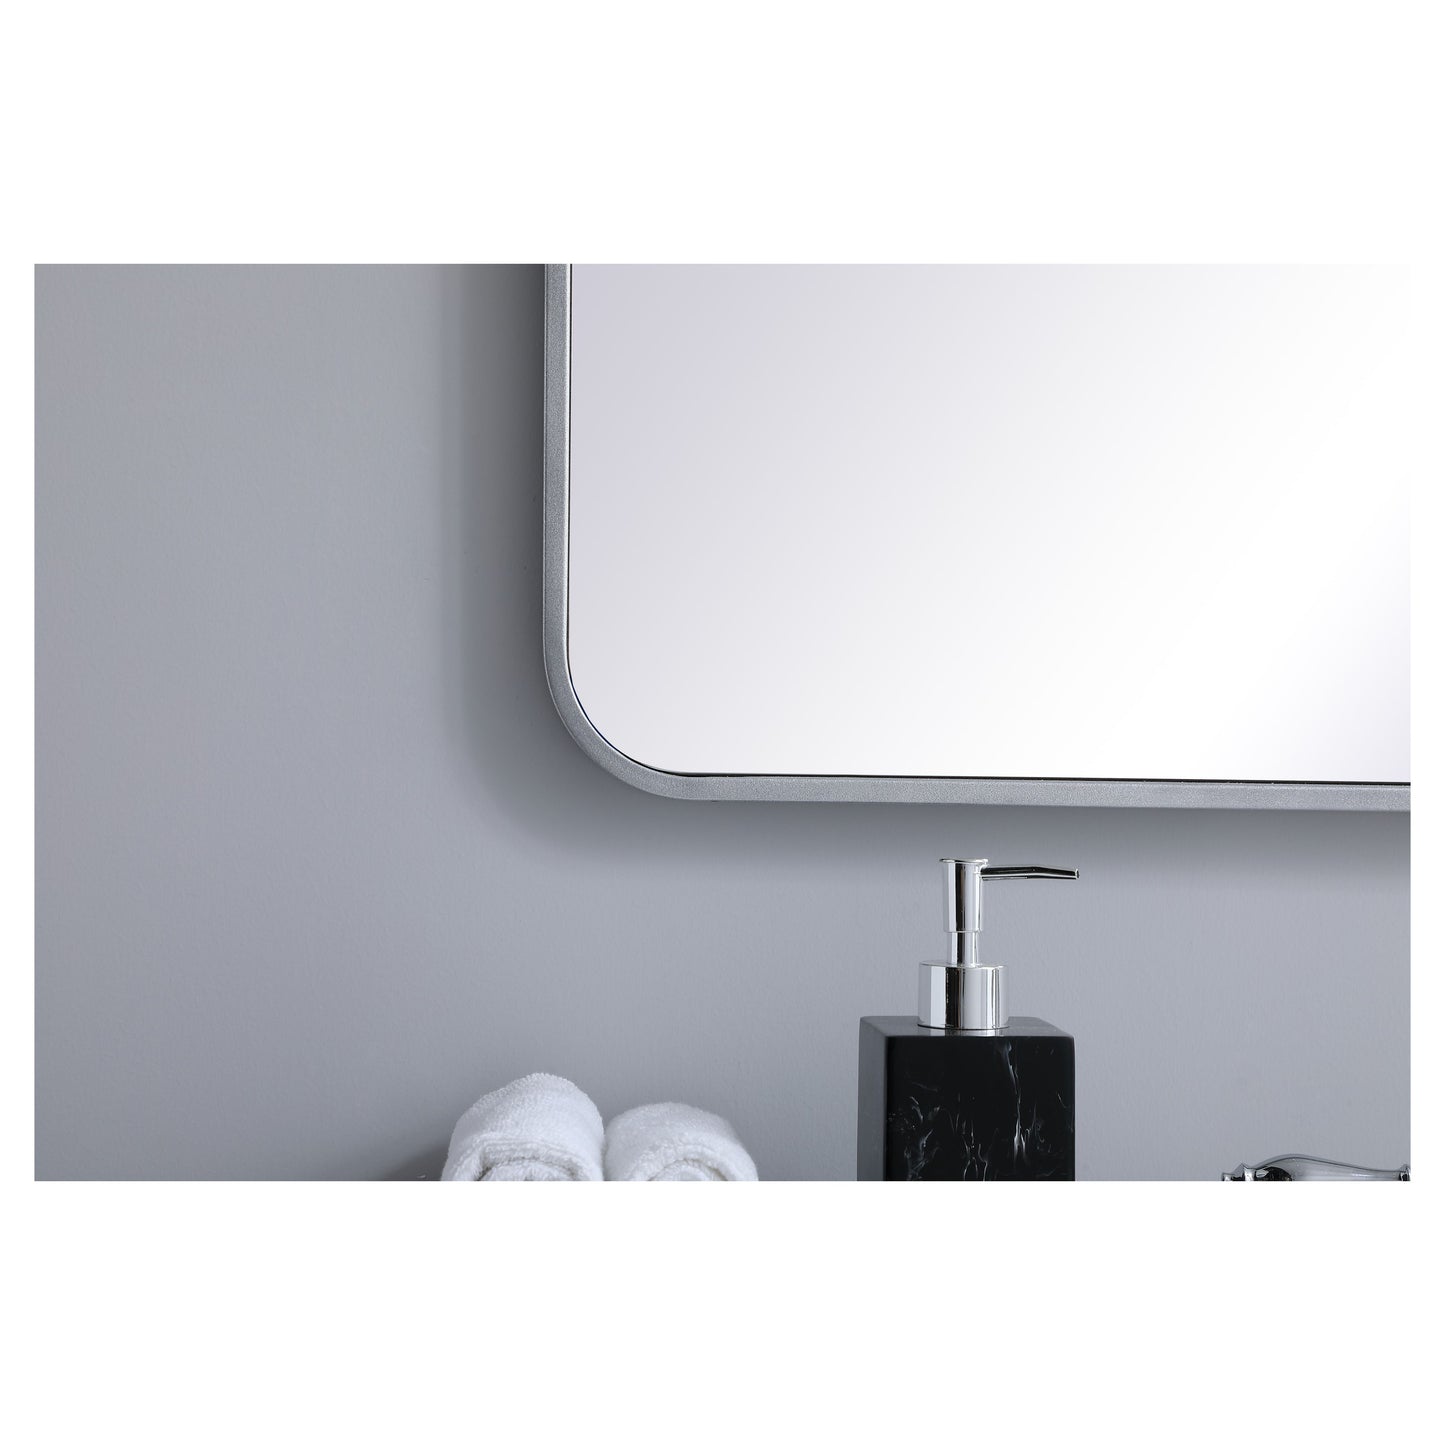 MR803636S Evermore 36" x 36" Metal Framed Rectangular Mirror in Silver